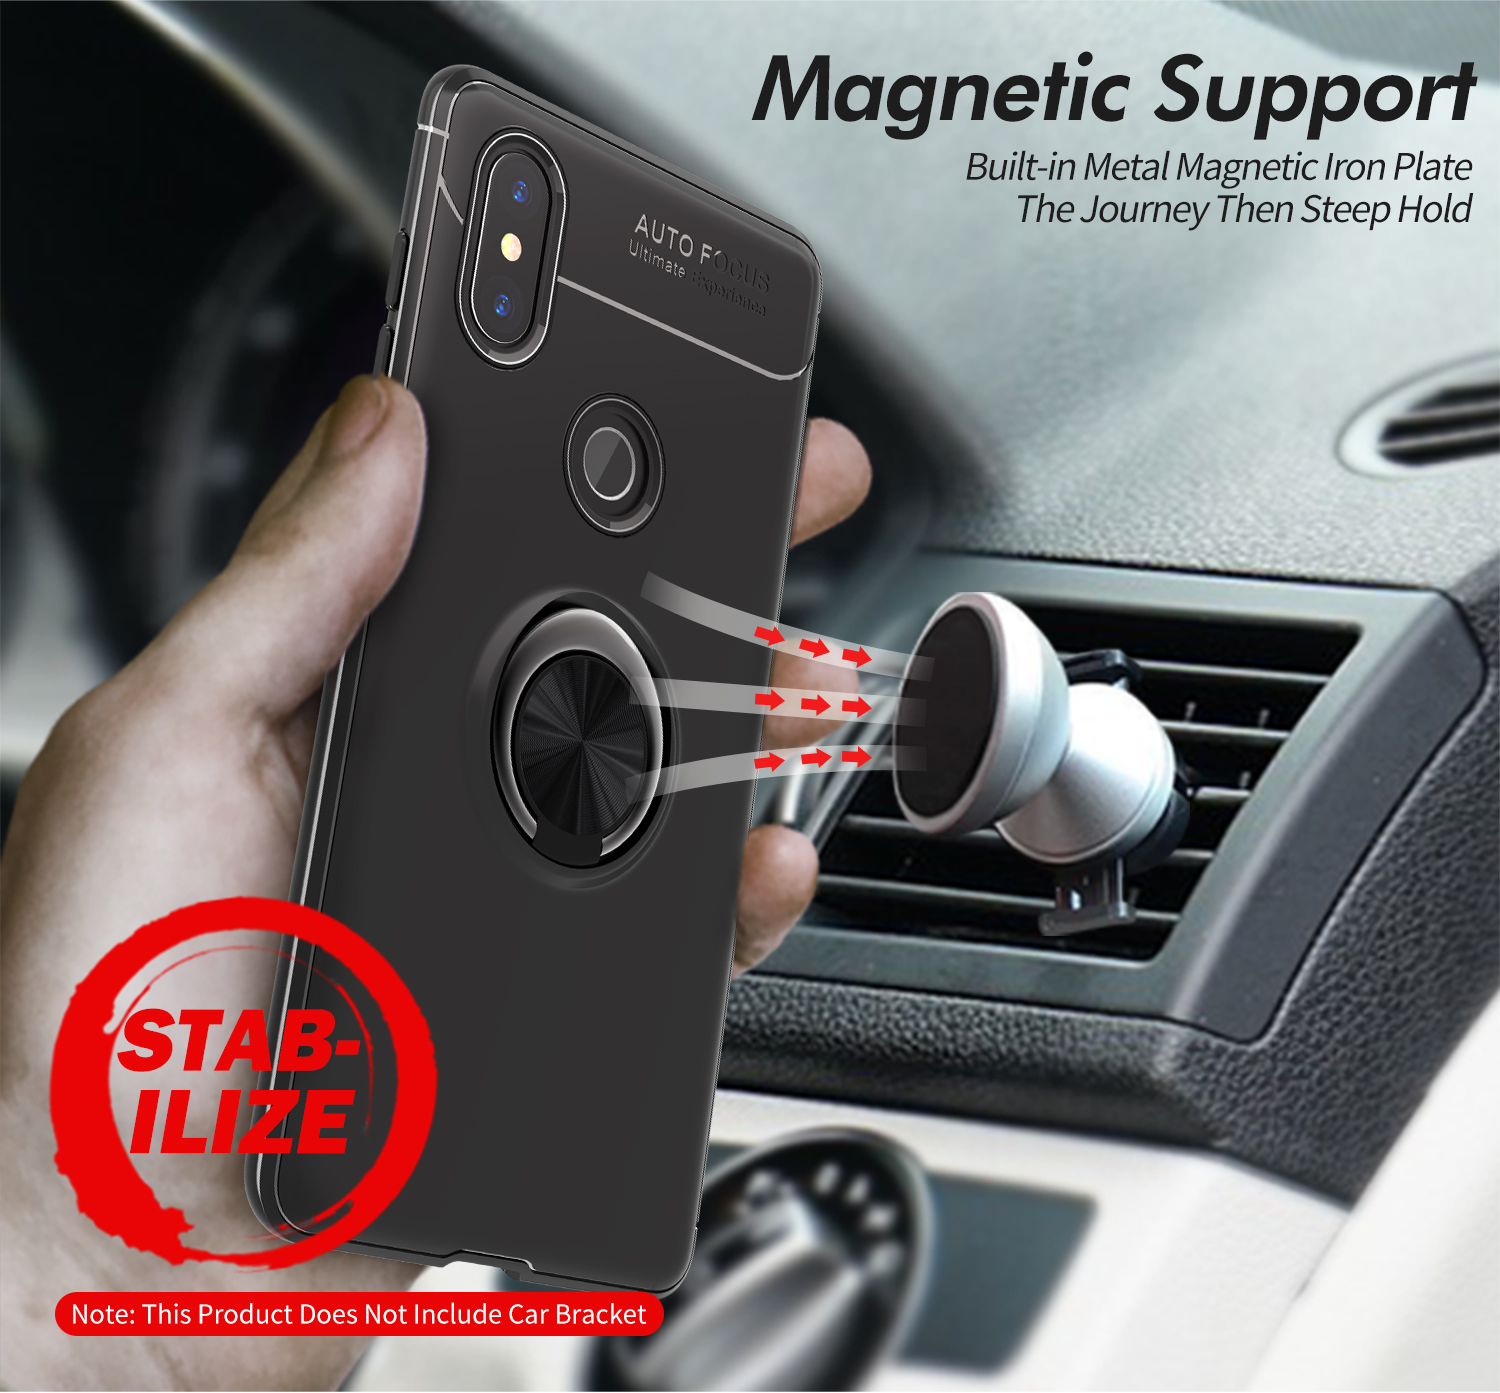 Bakeey-360deg-Adjustable-Metal-Ring-Kickstand-Magnetic-PC-Protective-Case-for-Xiaomi-Redmi-Note-6-Pr-1378687